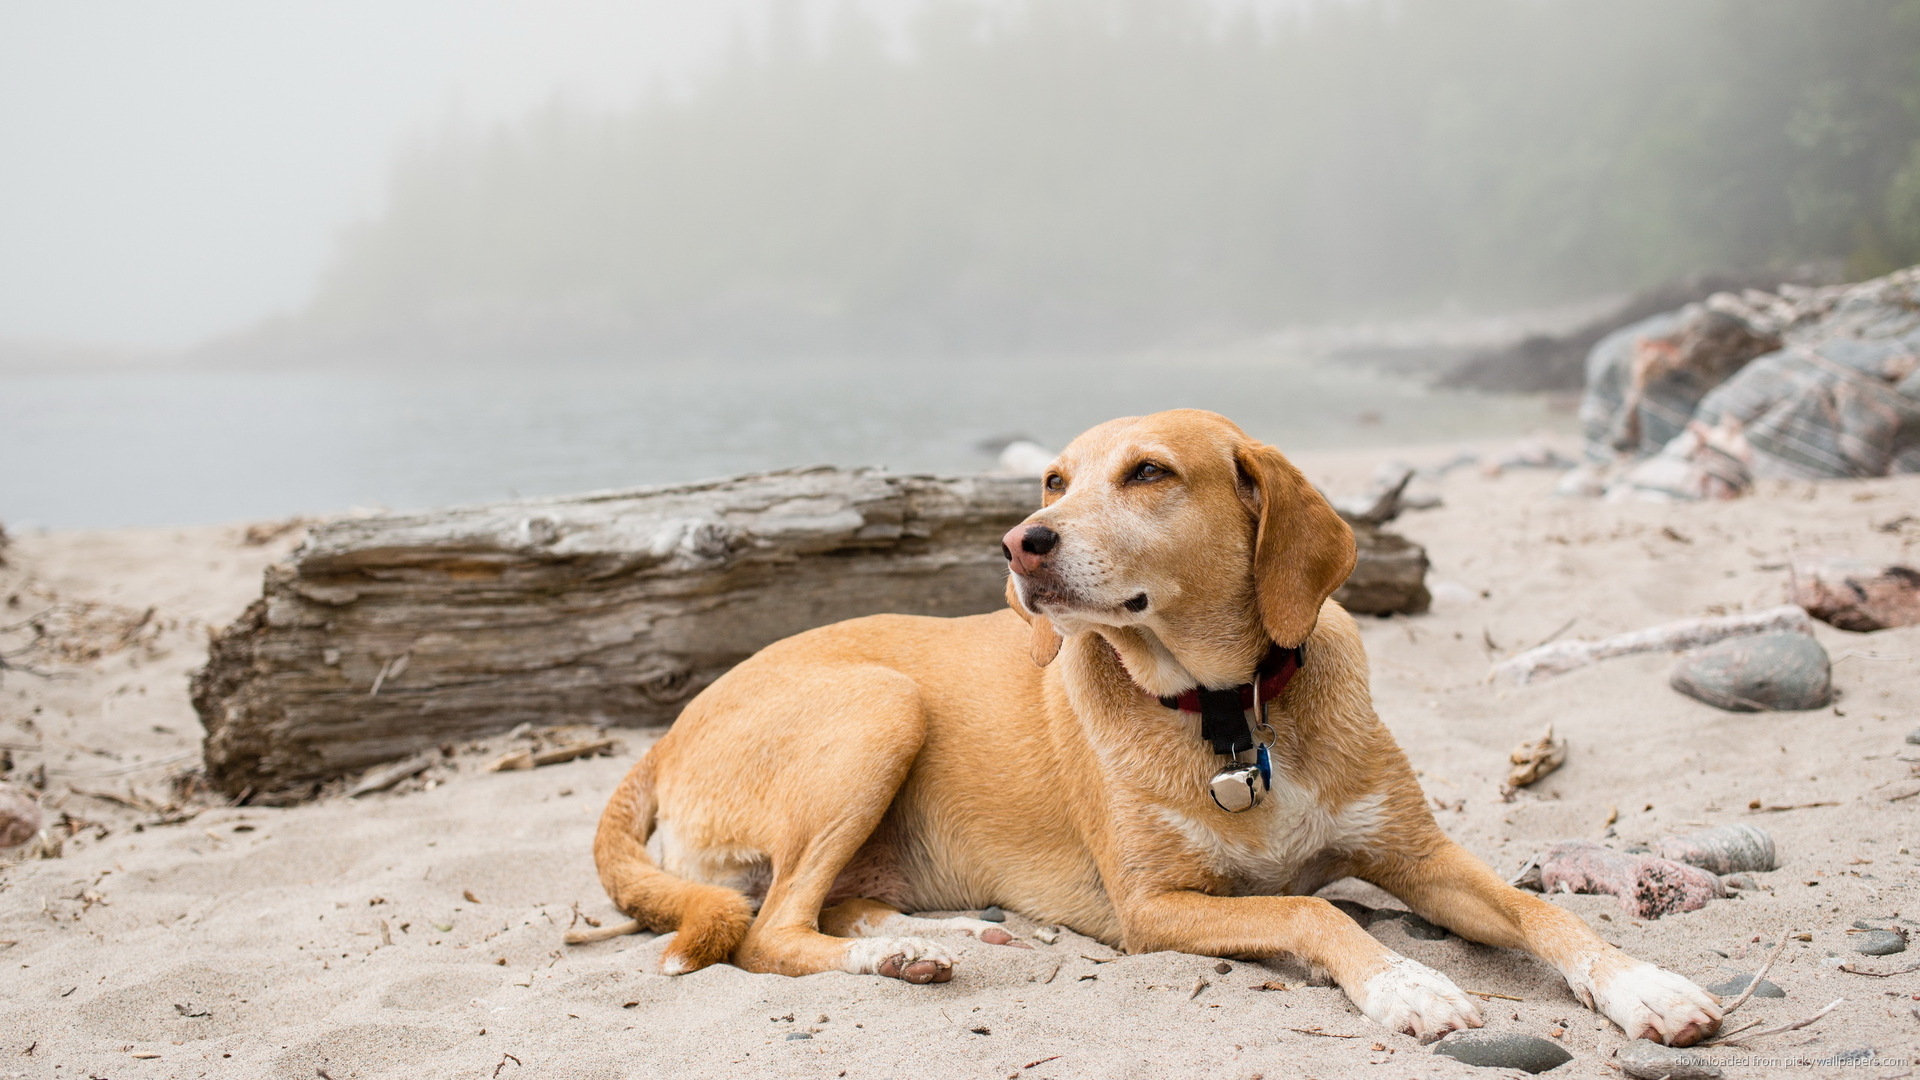 Dog Resting On The Beach Wallpaper Picture For iPhone Blackberry